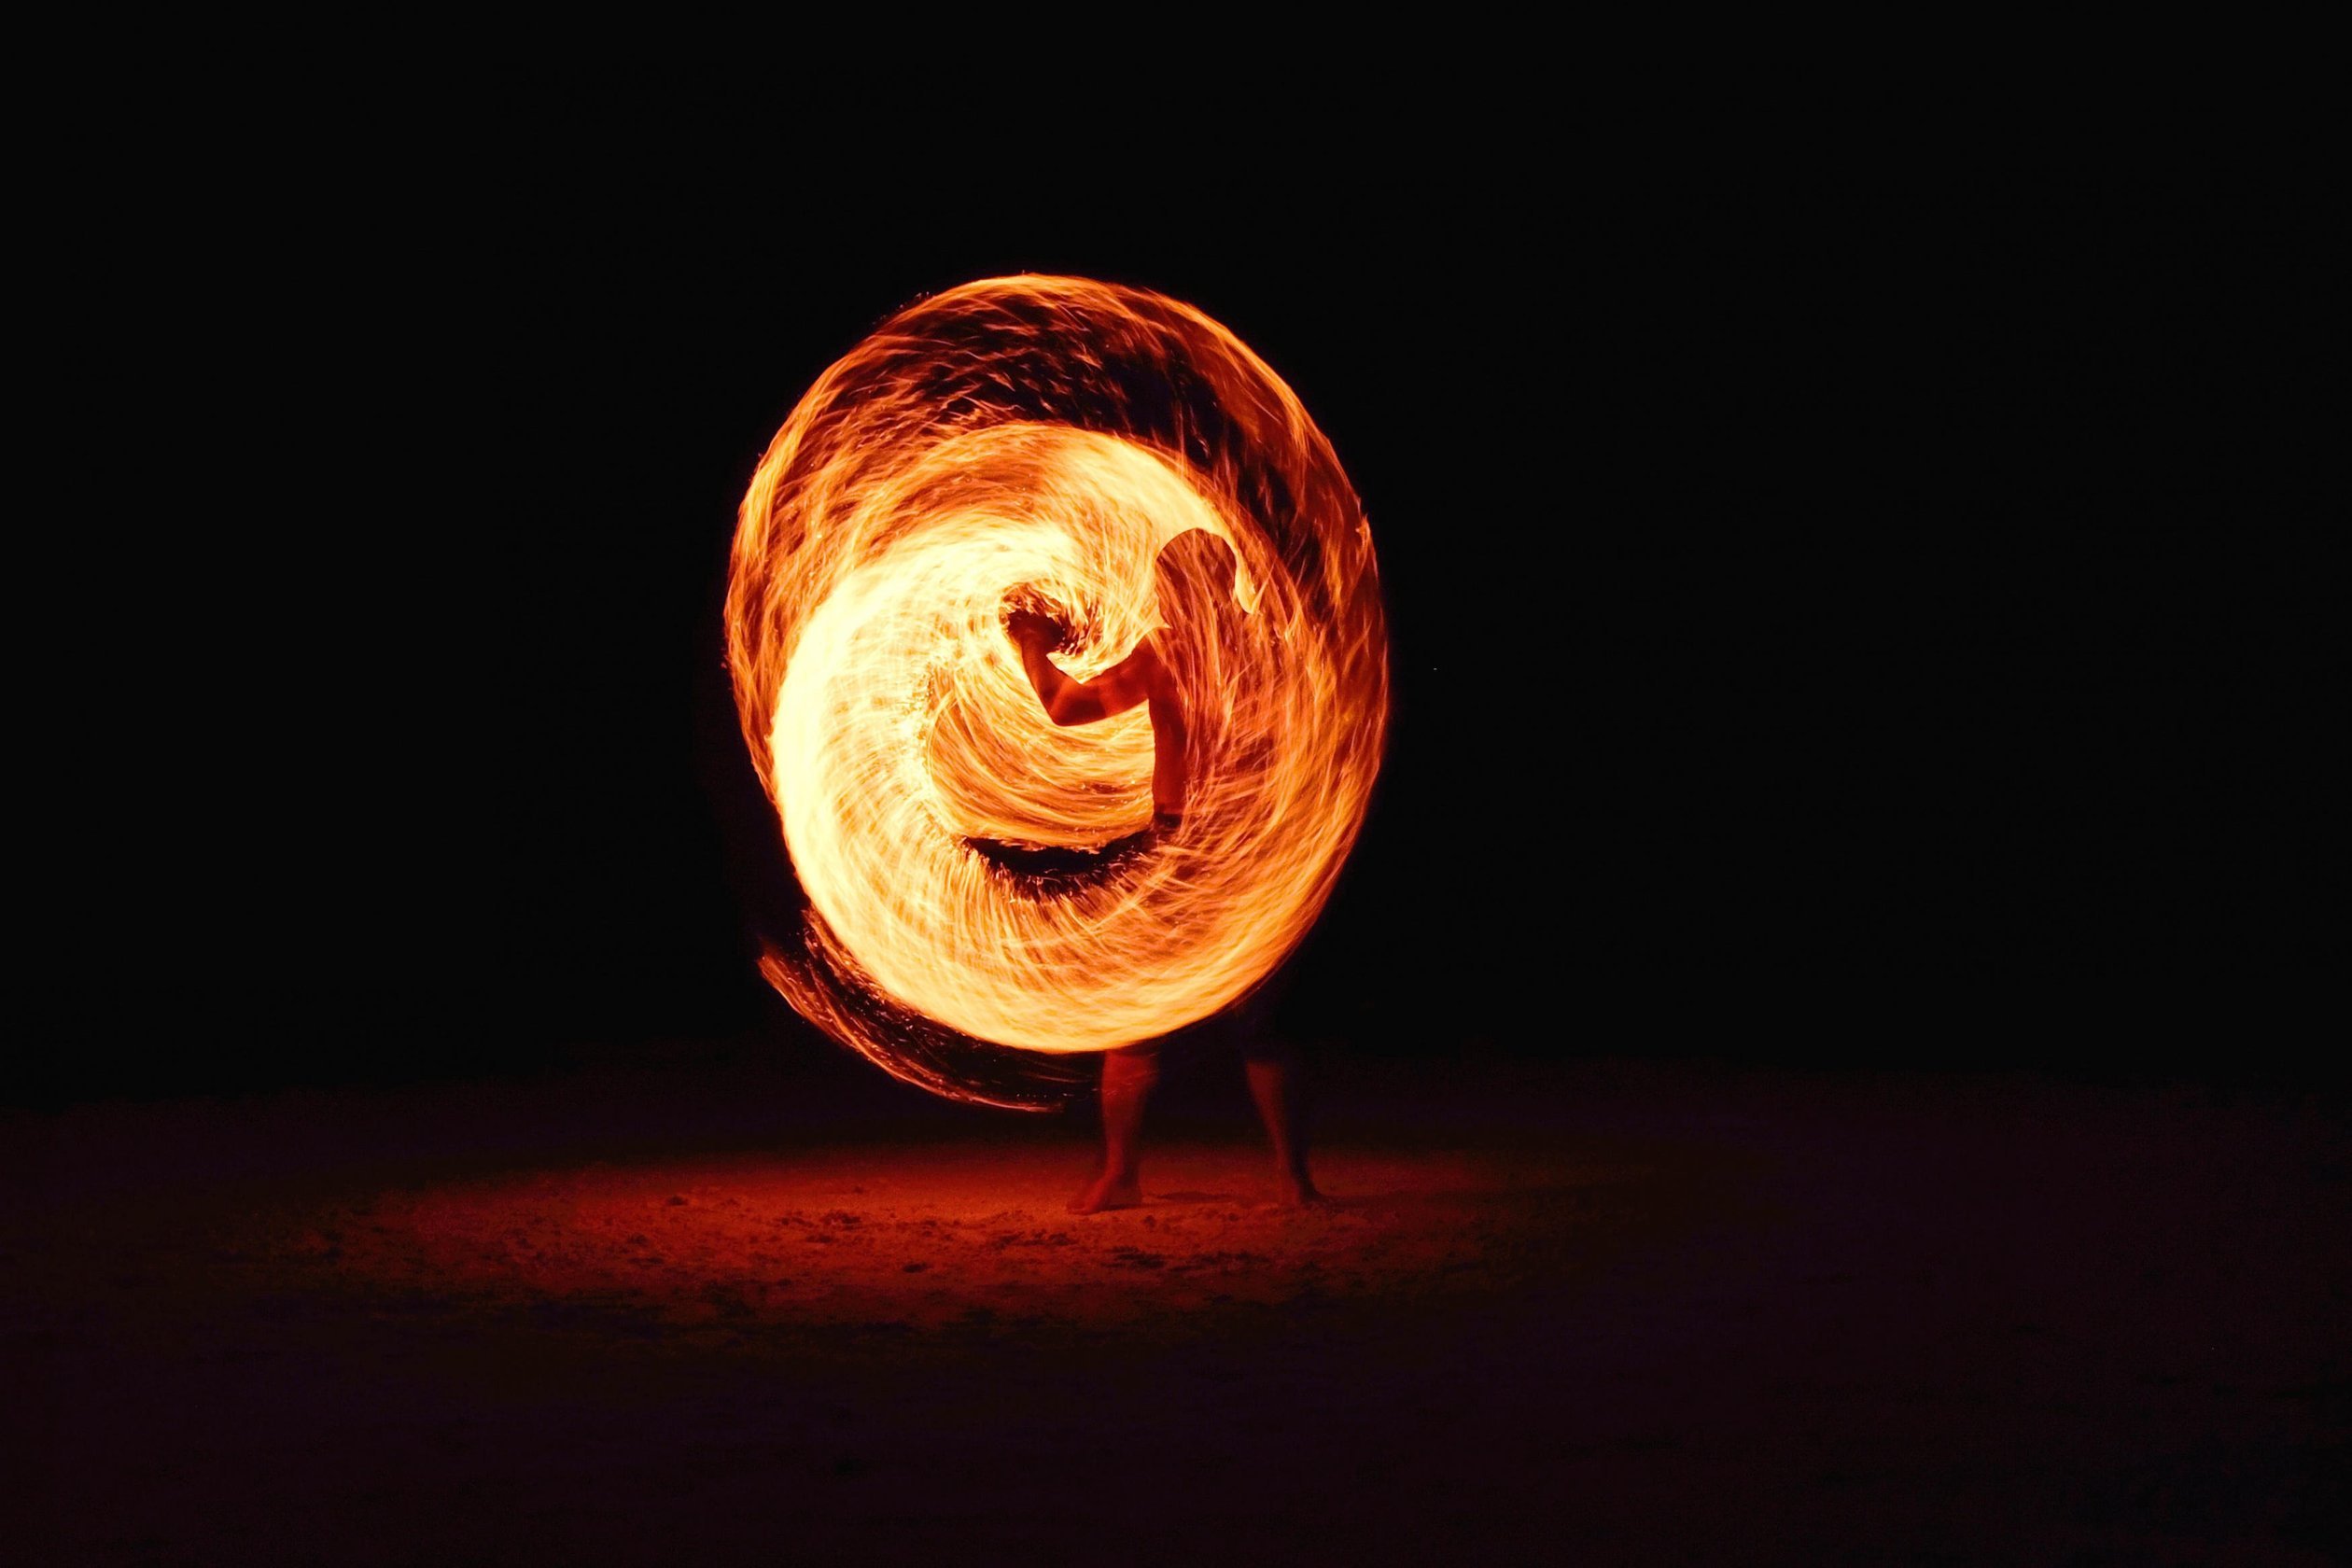 Fire photography - Canon Europe